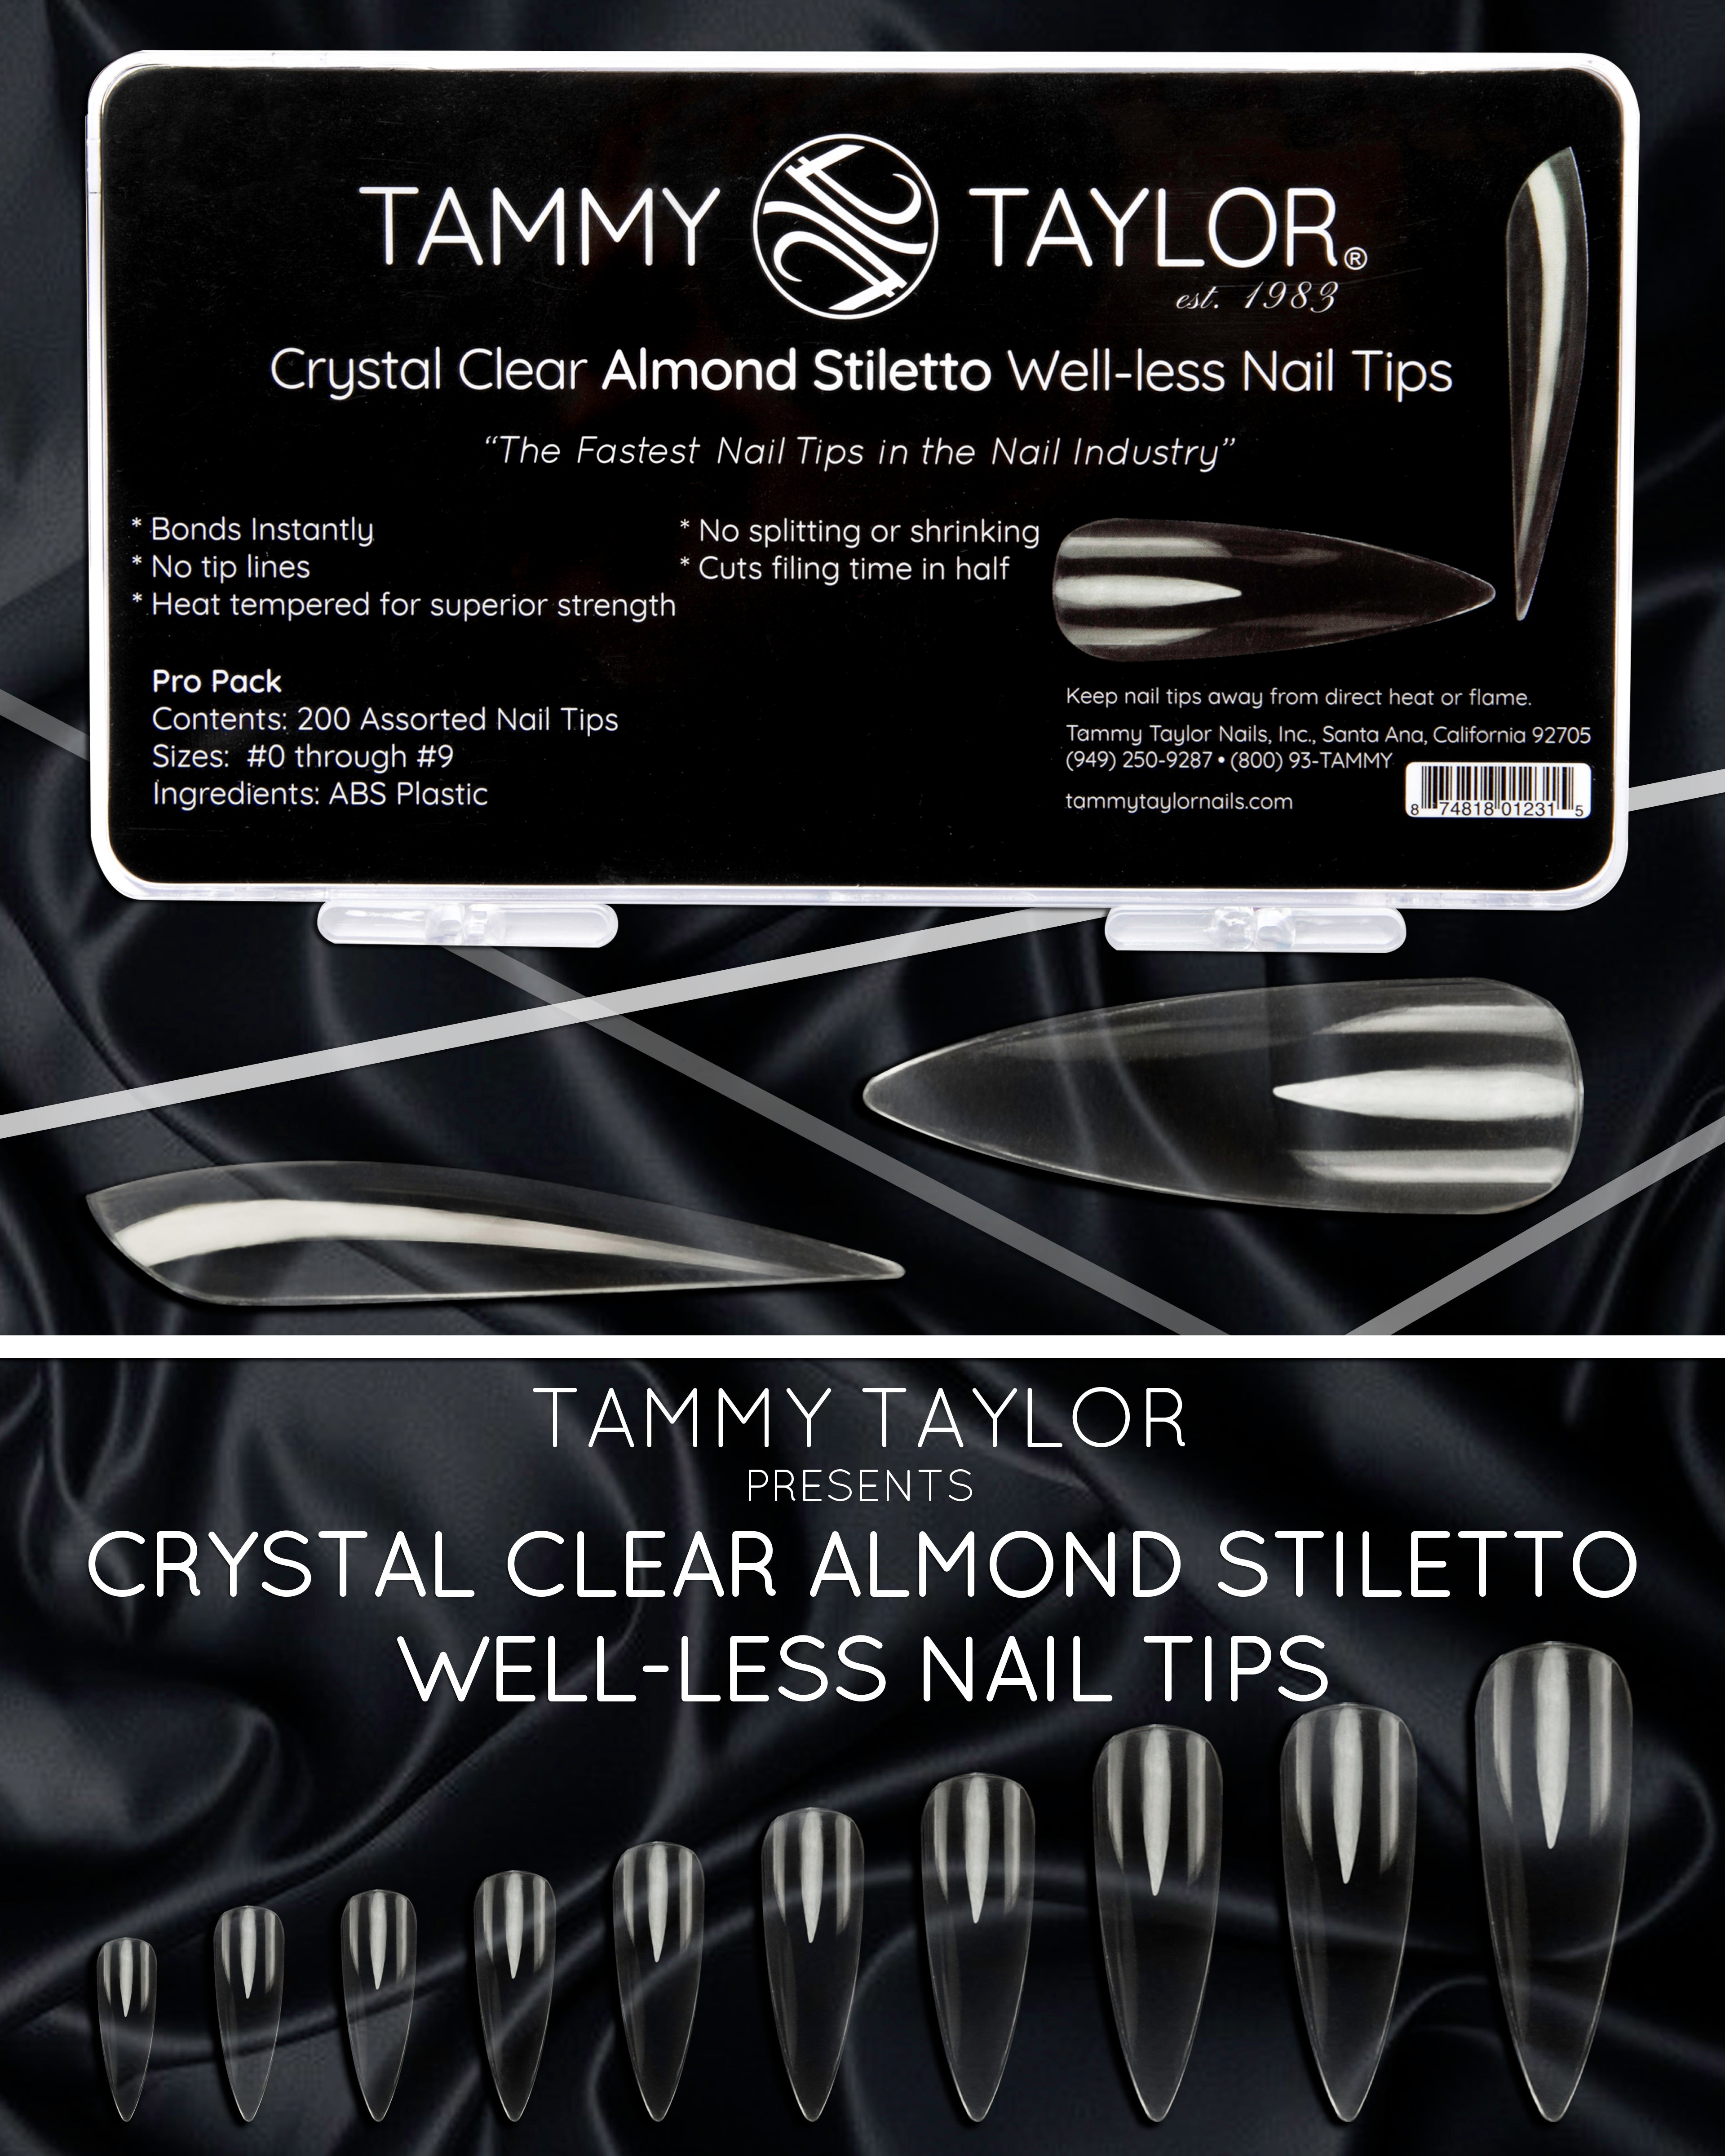 Crystal Clear Almond Stiletto Well-less Nail Tips